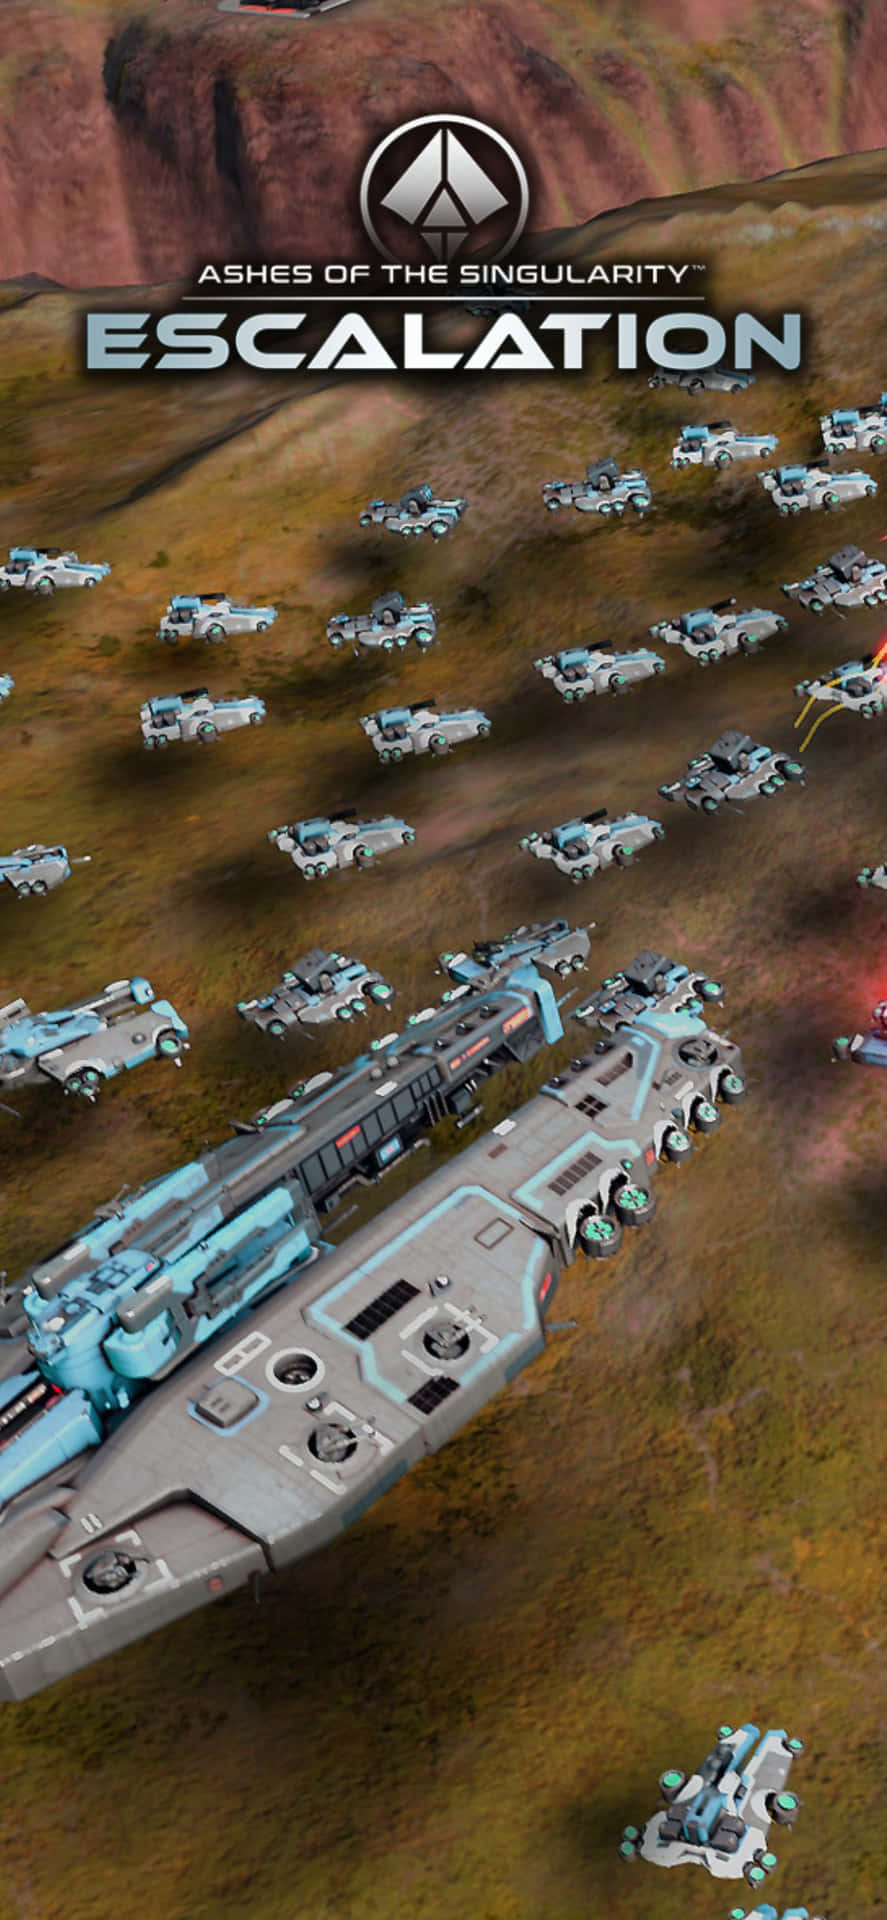 Explore a newly discovered universe with Iphone X Ashes Of The Singularity Escalation.